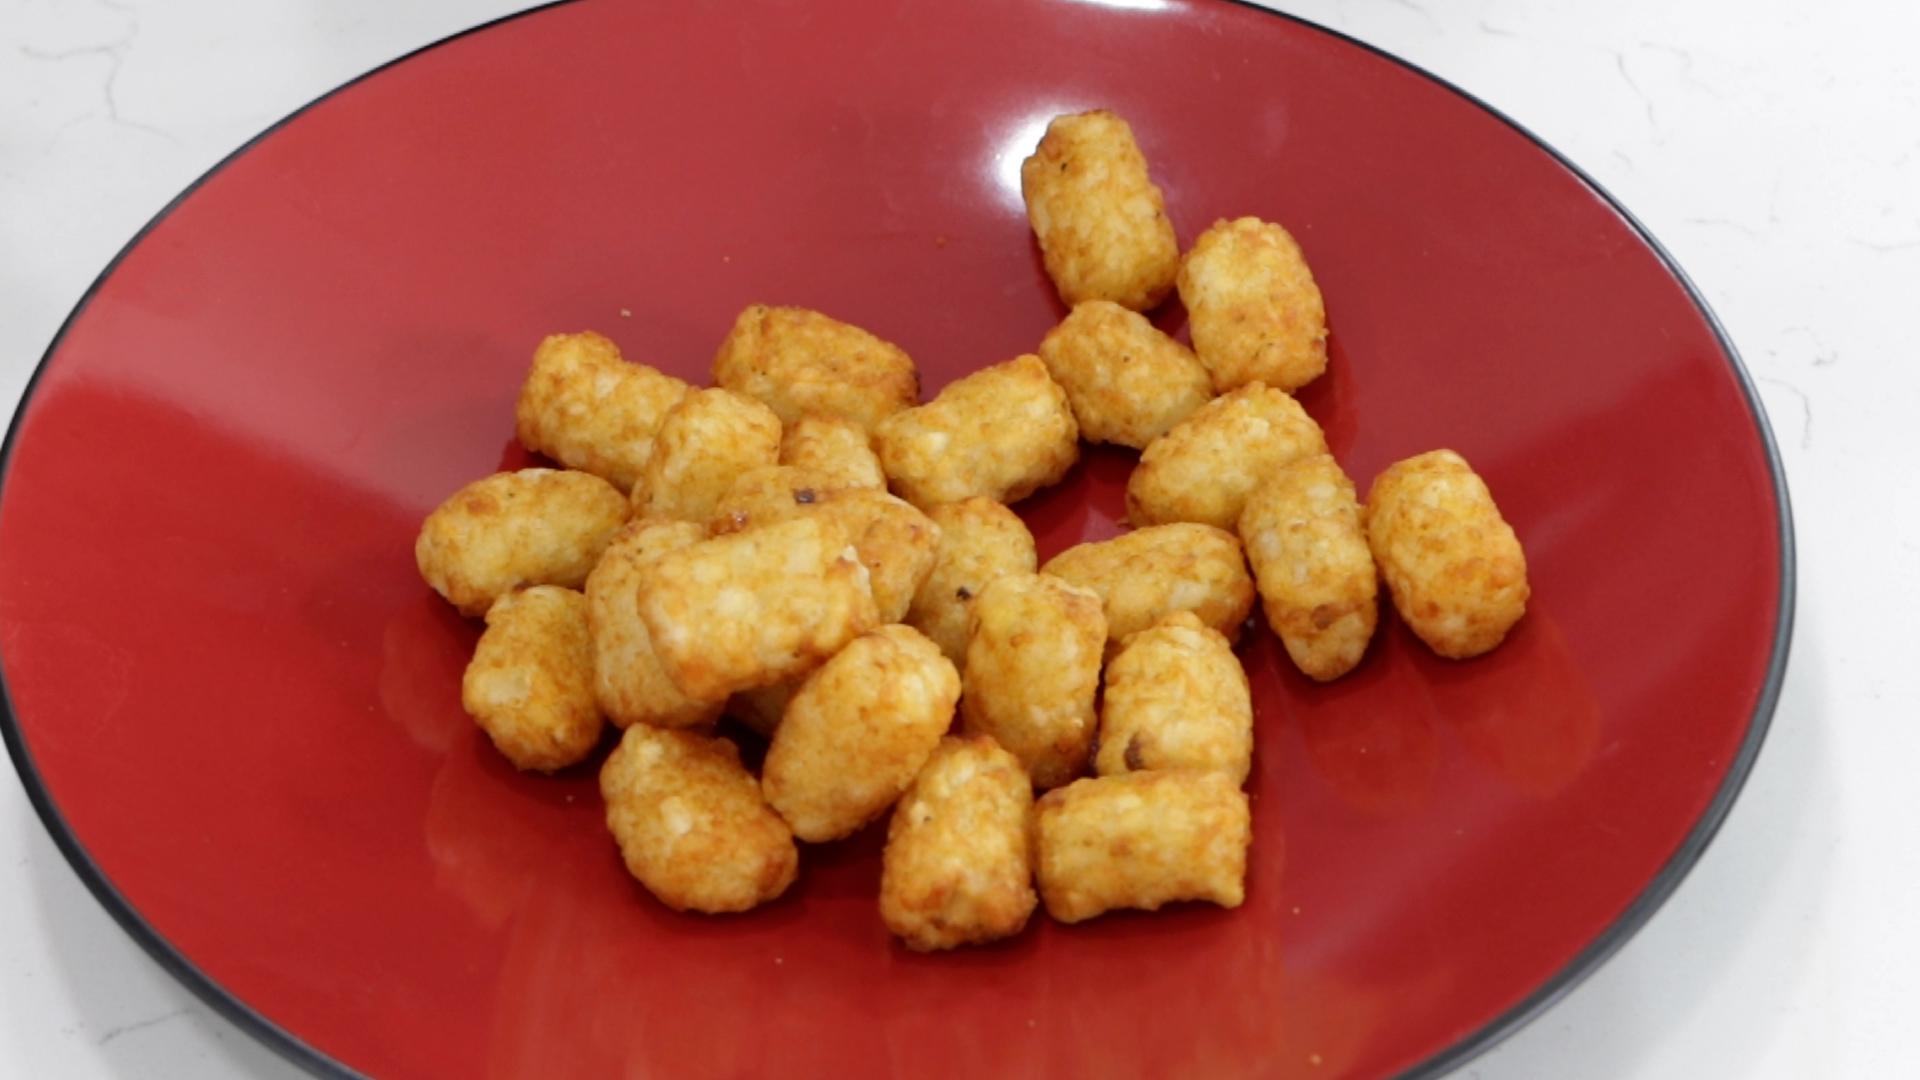 How to cook frozen tater tots in air fryer Copy 01.00_02_03_11.Still004.jpg